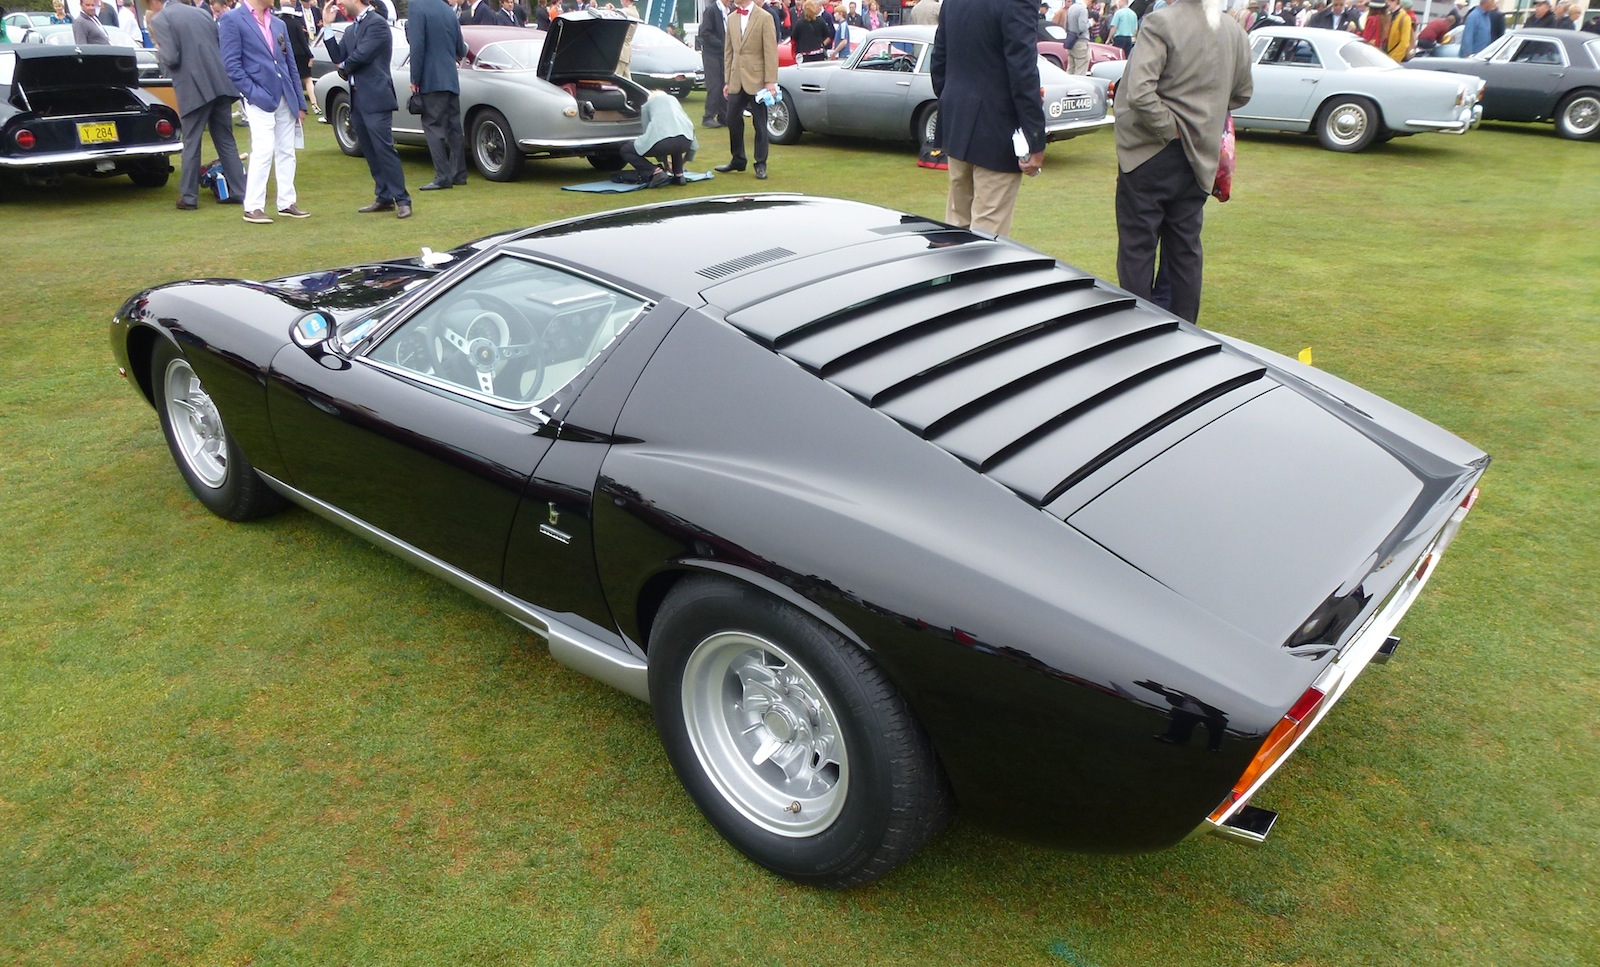 Is The 'S' Version Really That Much Better For The Lamborghini Miura, Islero and Maserati Ghibli?